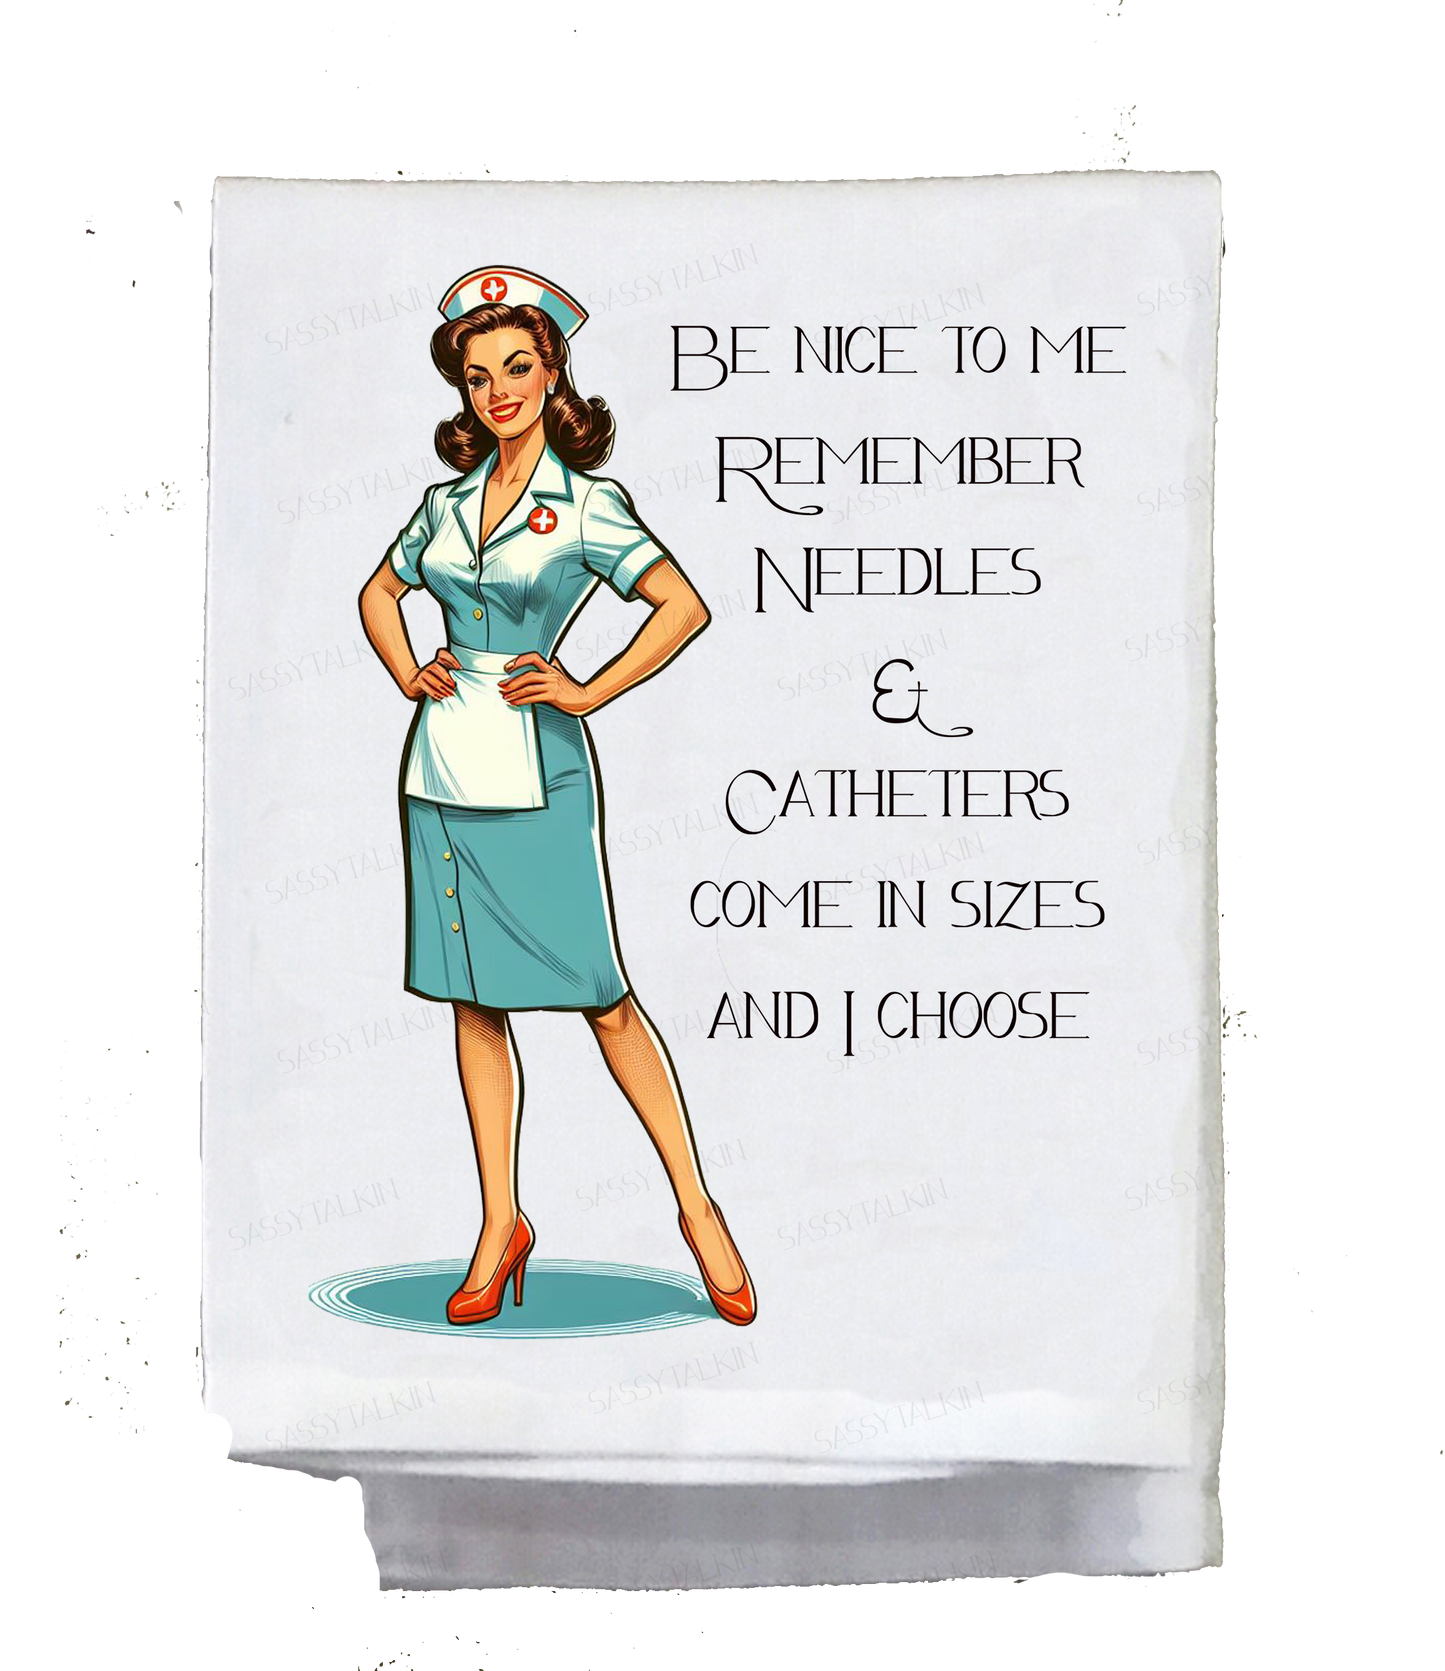 Dish Towel, Sassy Girl, Be nice to me remember needles & catheters come in sizes and I choose